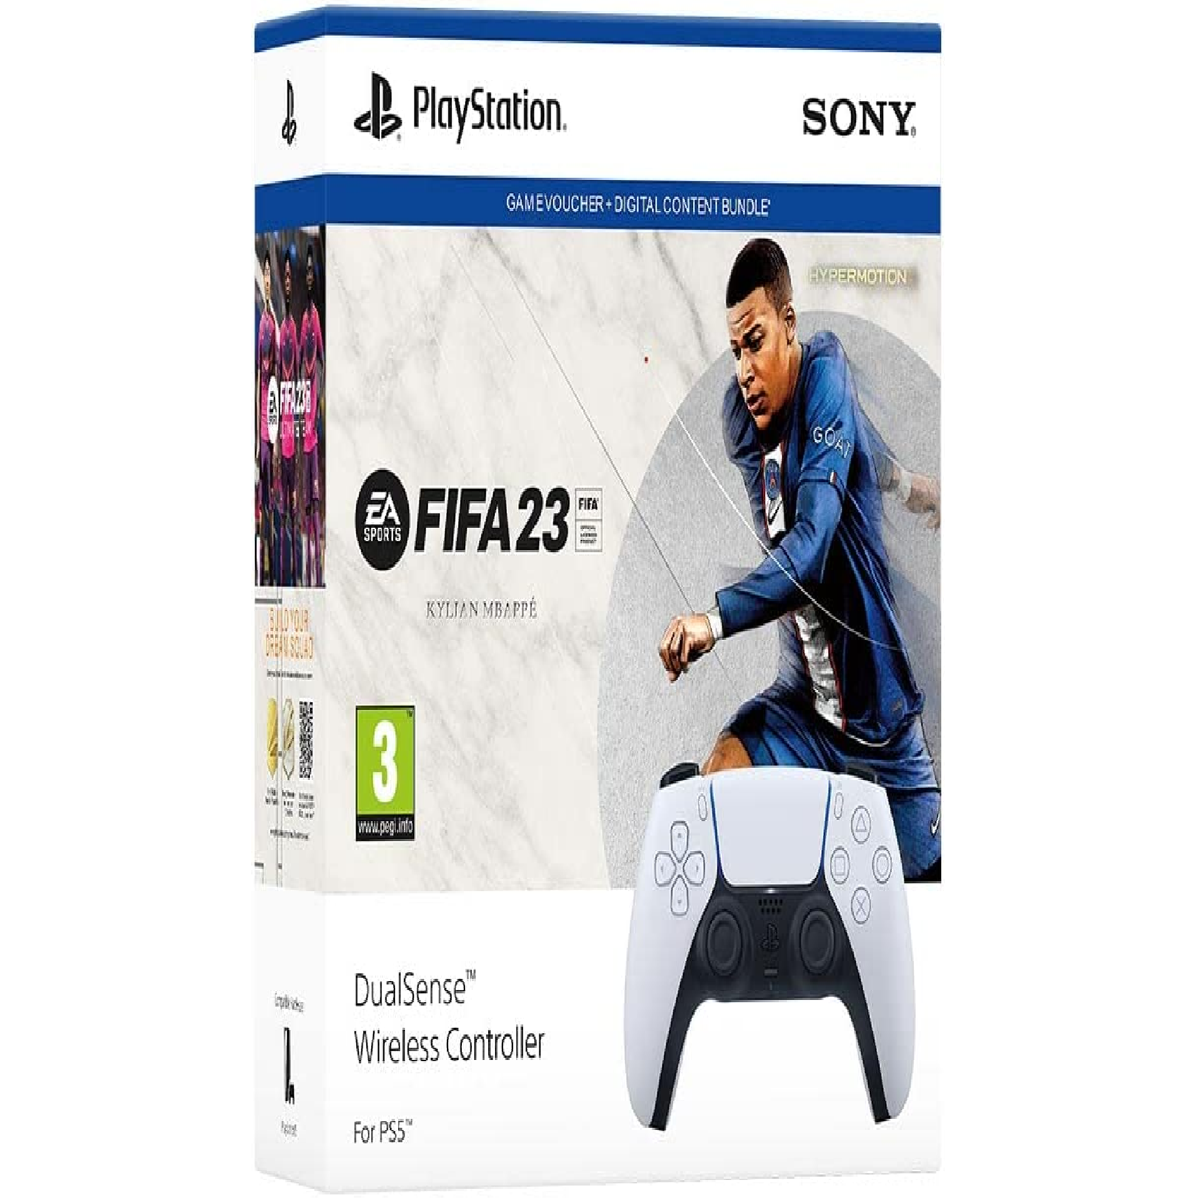 PS5 FIFA 23 bundle to be available in October - GadgetMatch